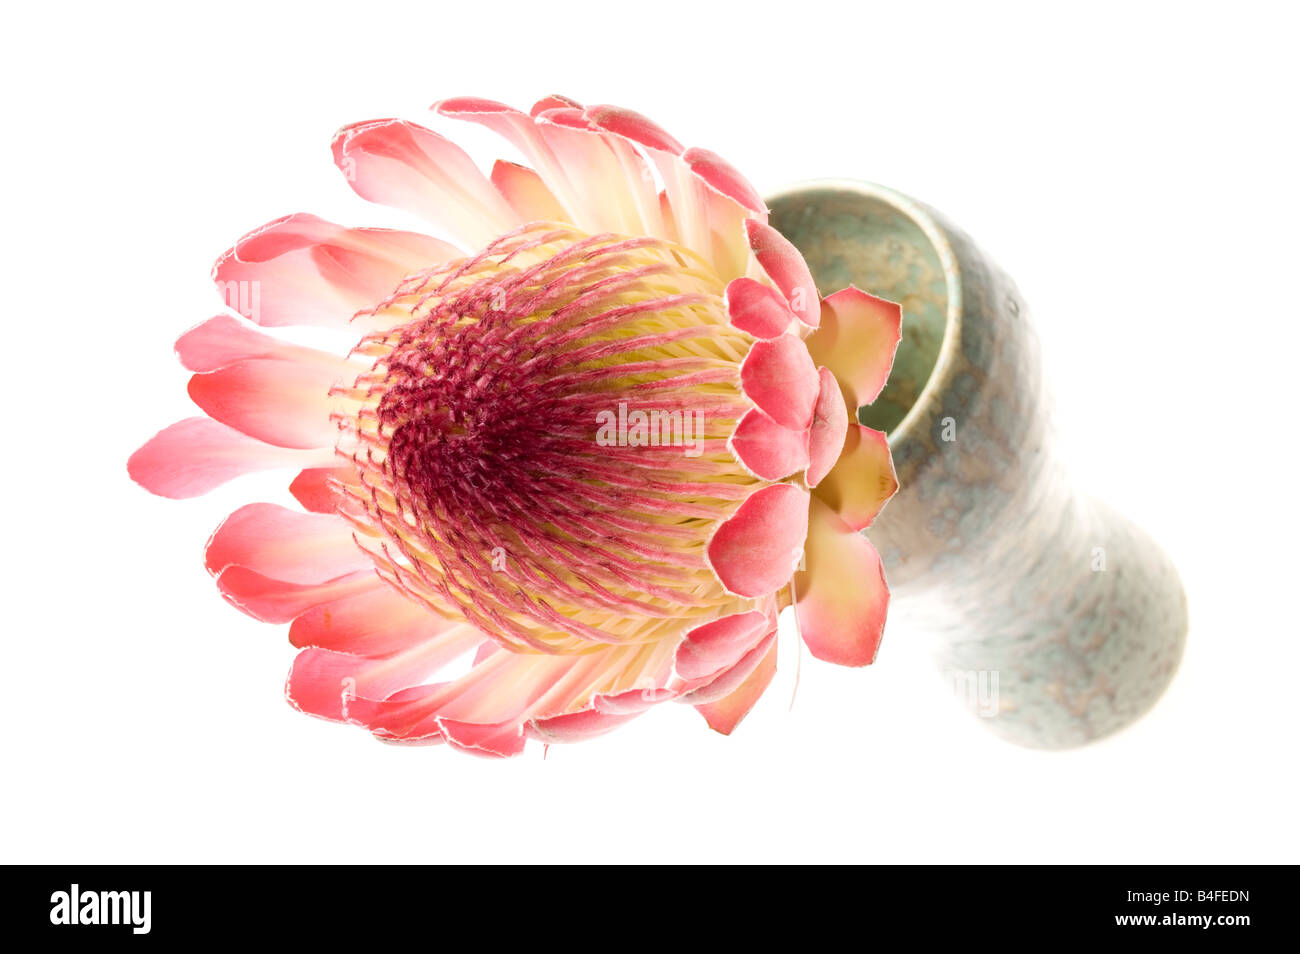 Protea flower in a vase Stock Photo